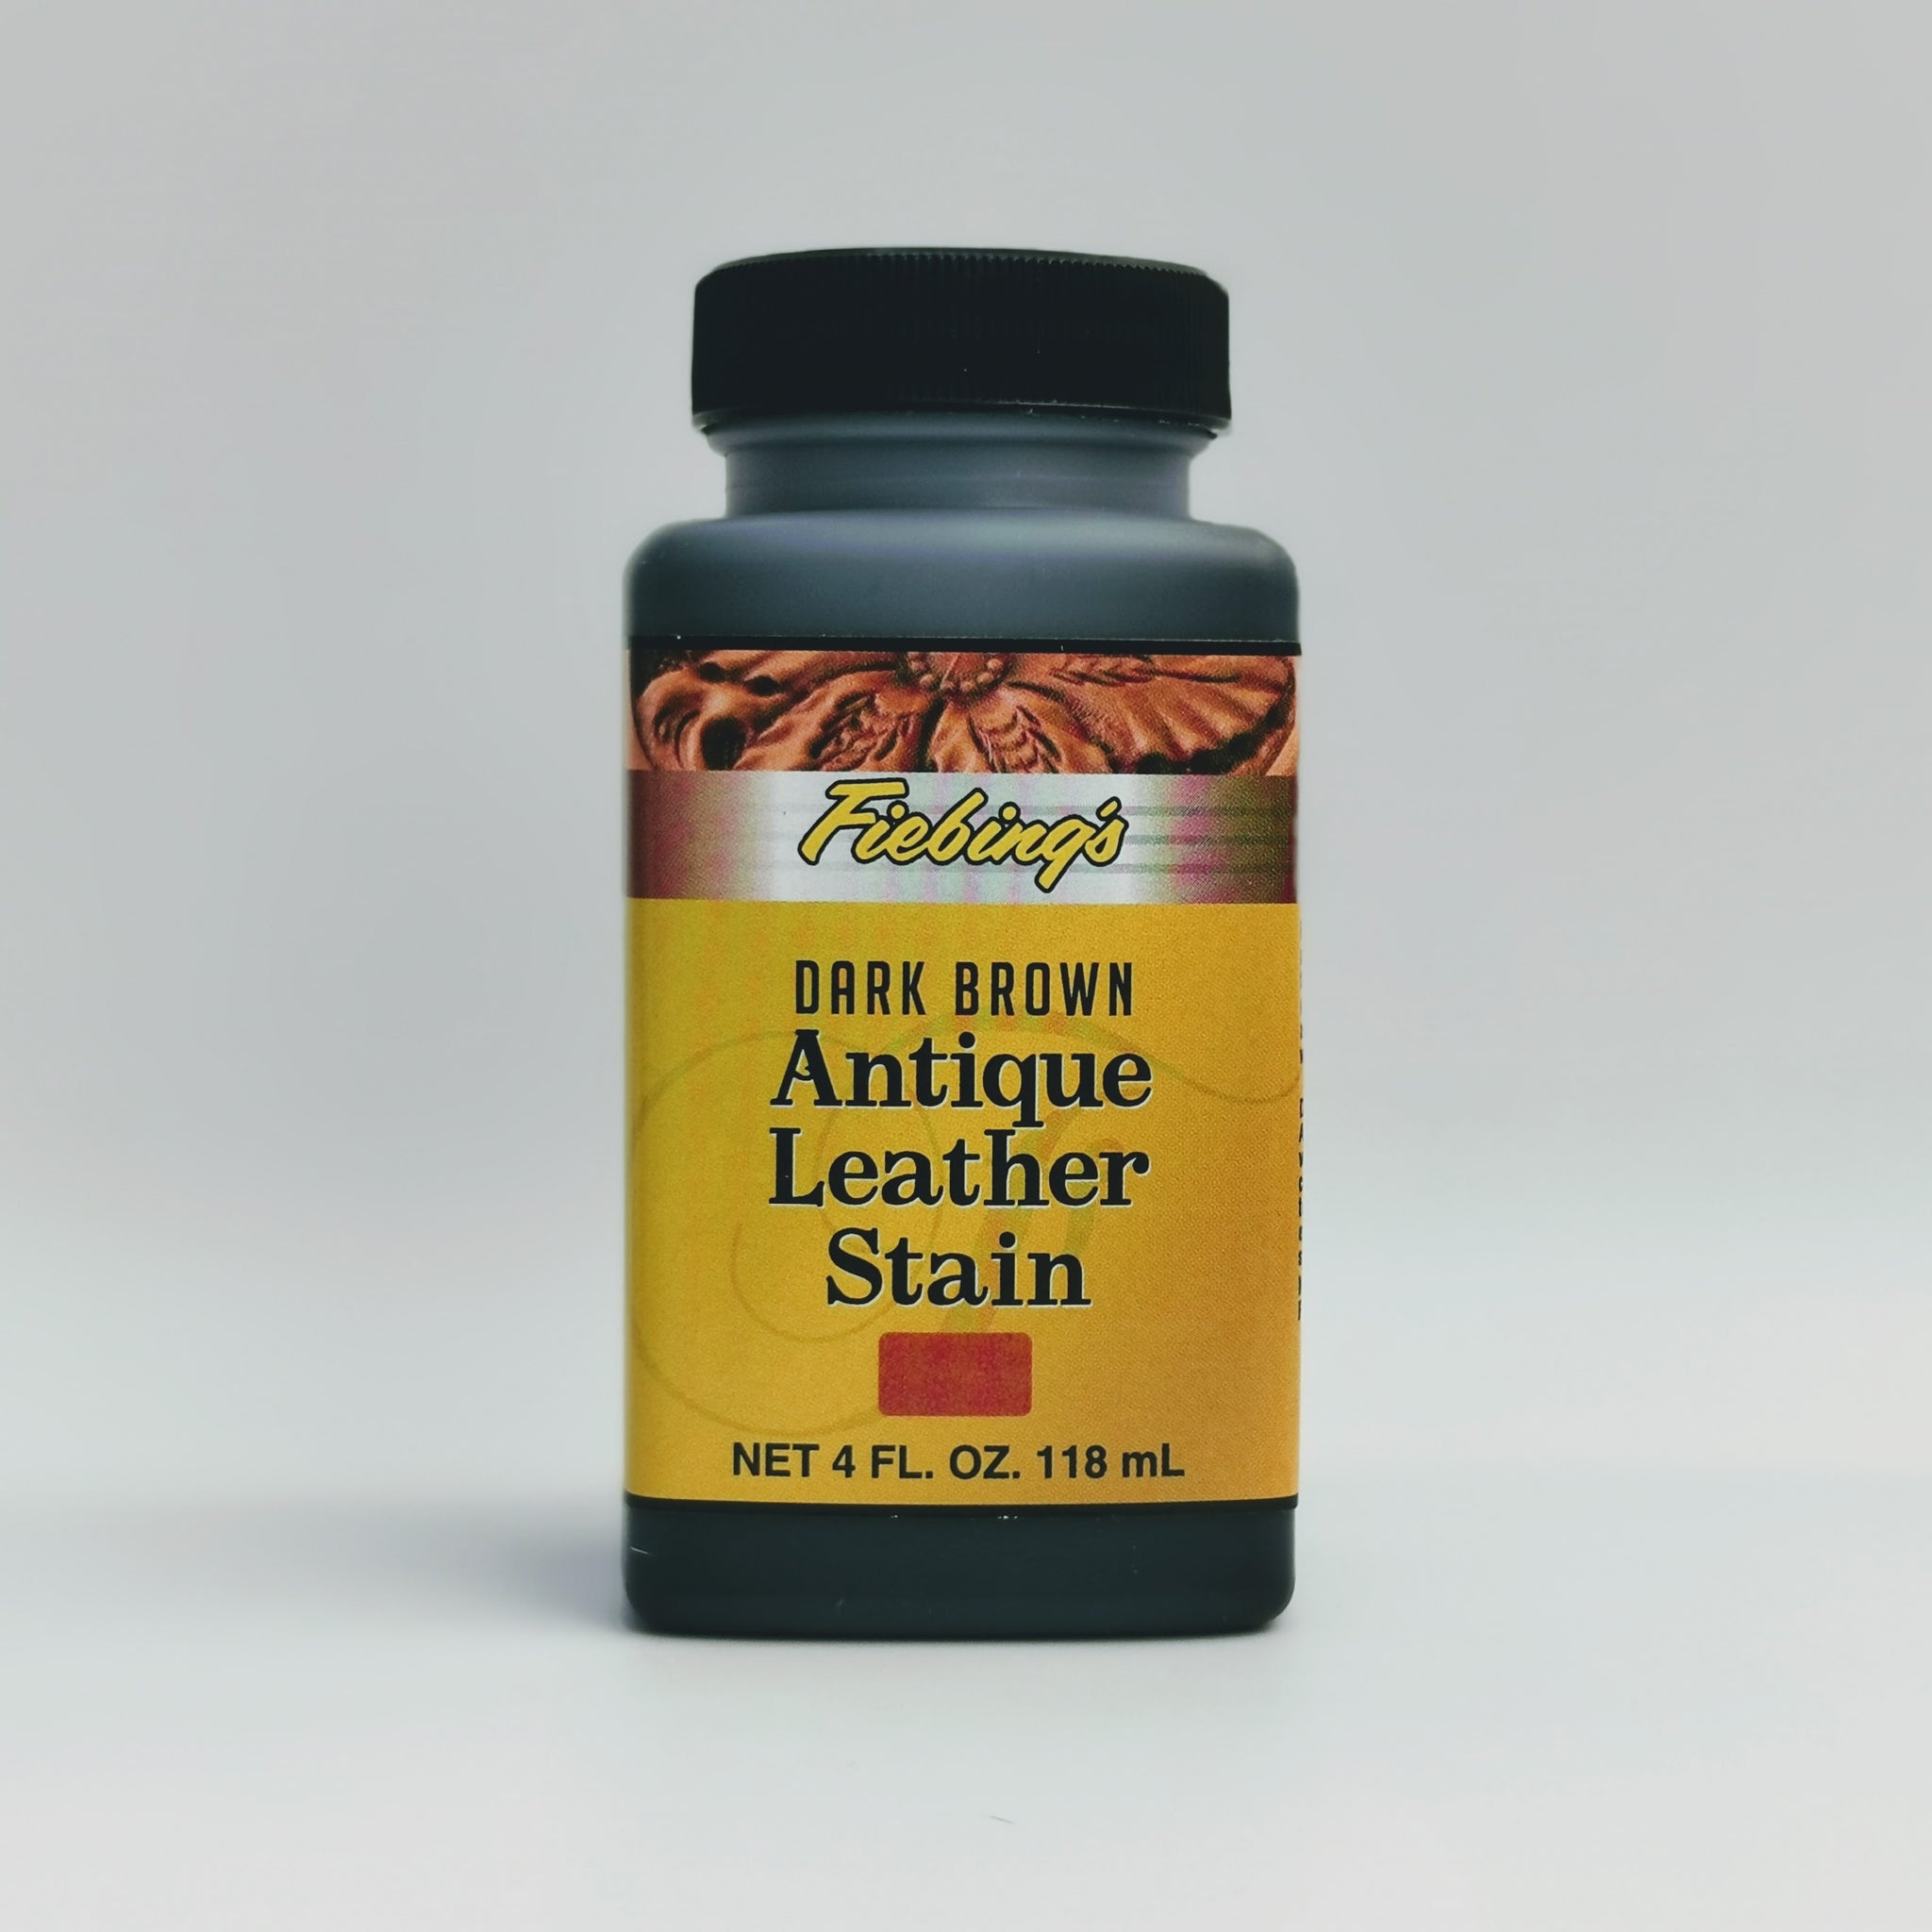 Fiebing's Antique Leather Stain